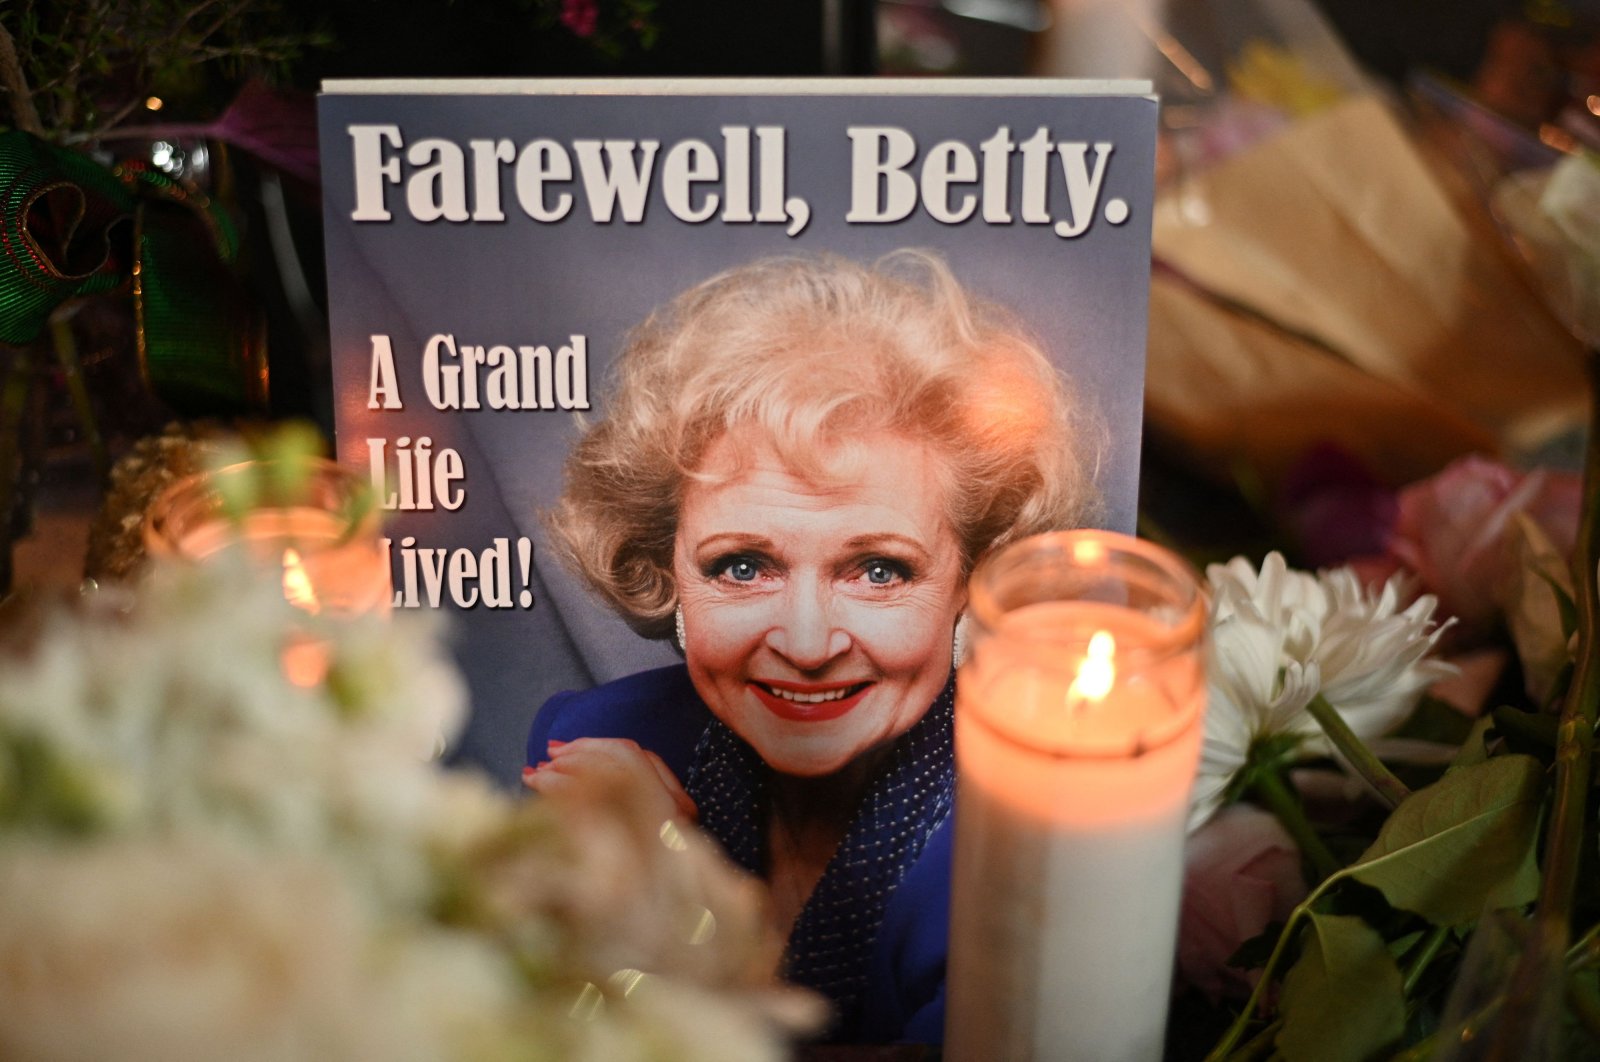 Flowers, candles and mementos cover the star of late actress Betty White on the Hollywood Walk of Fame, in Los Angeles, California, Dec. 31, 2021. (Photo by Robyn Beck / AFP)